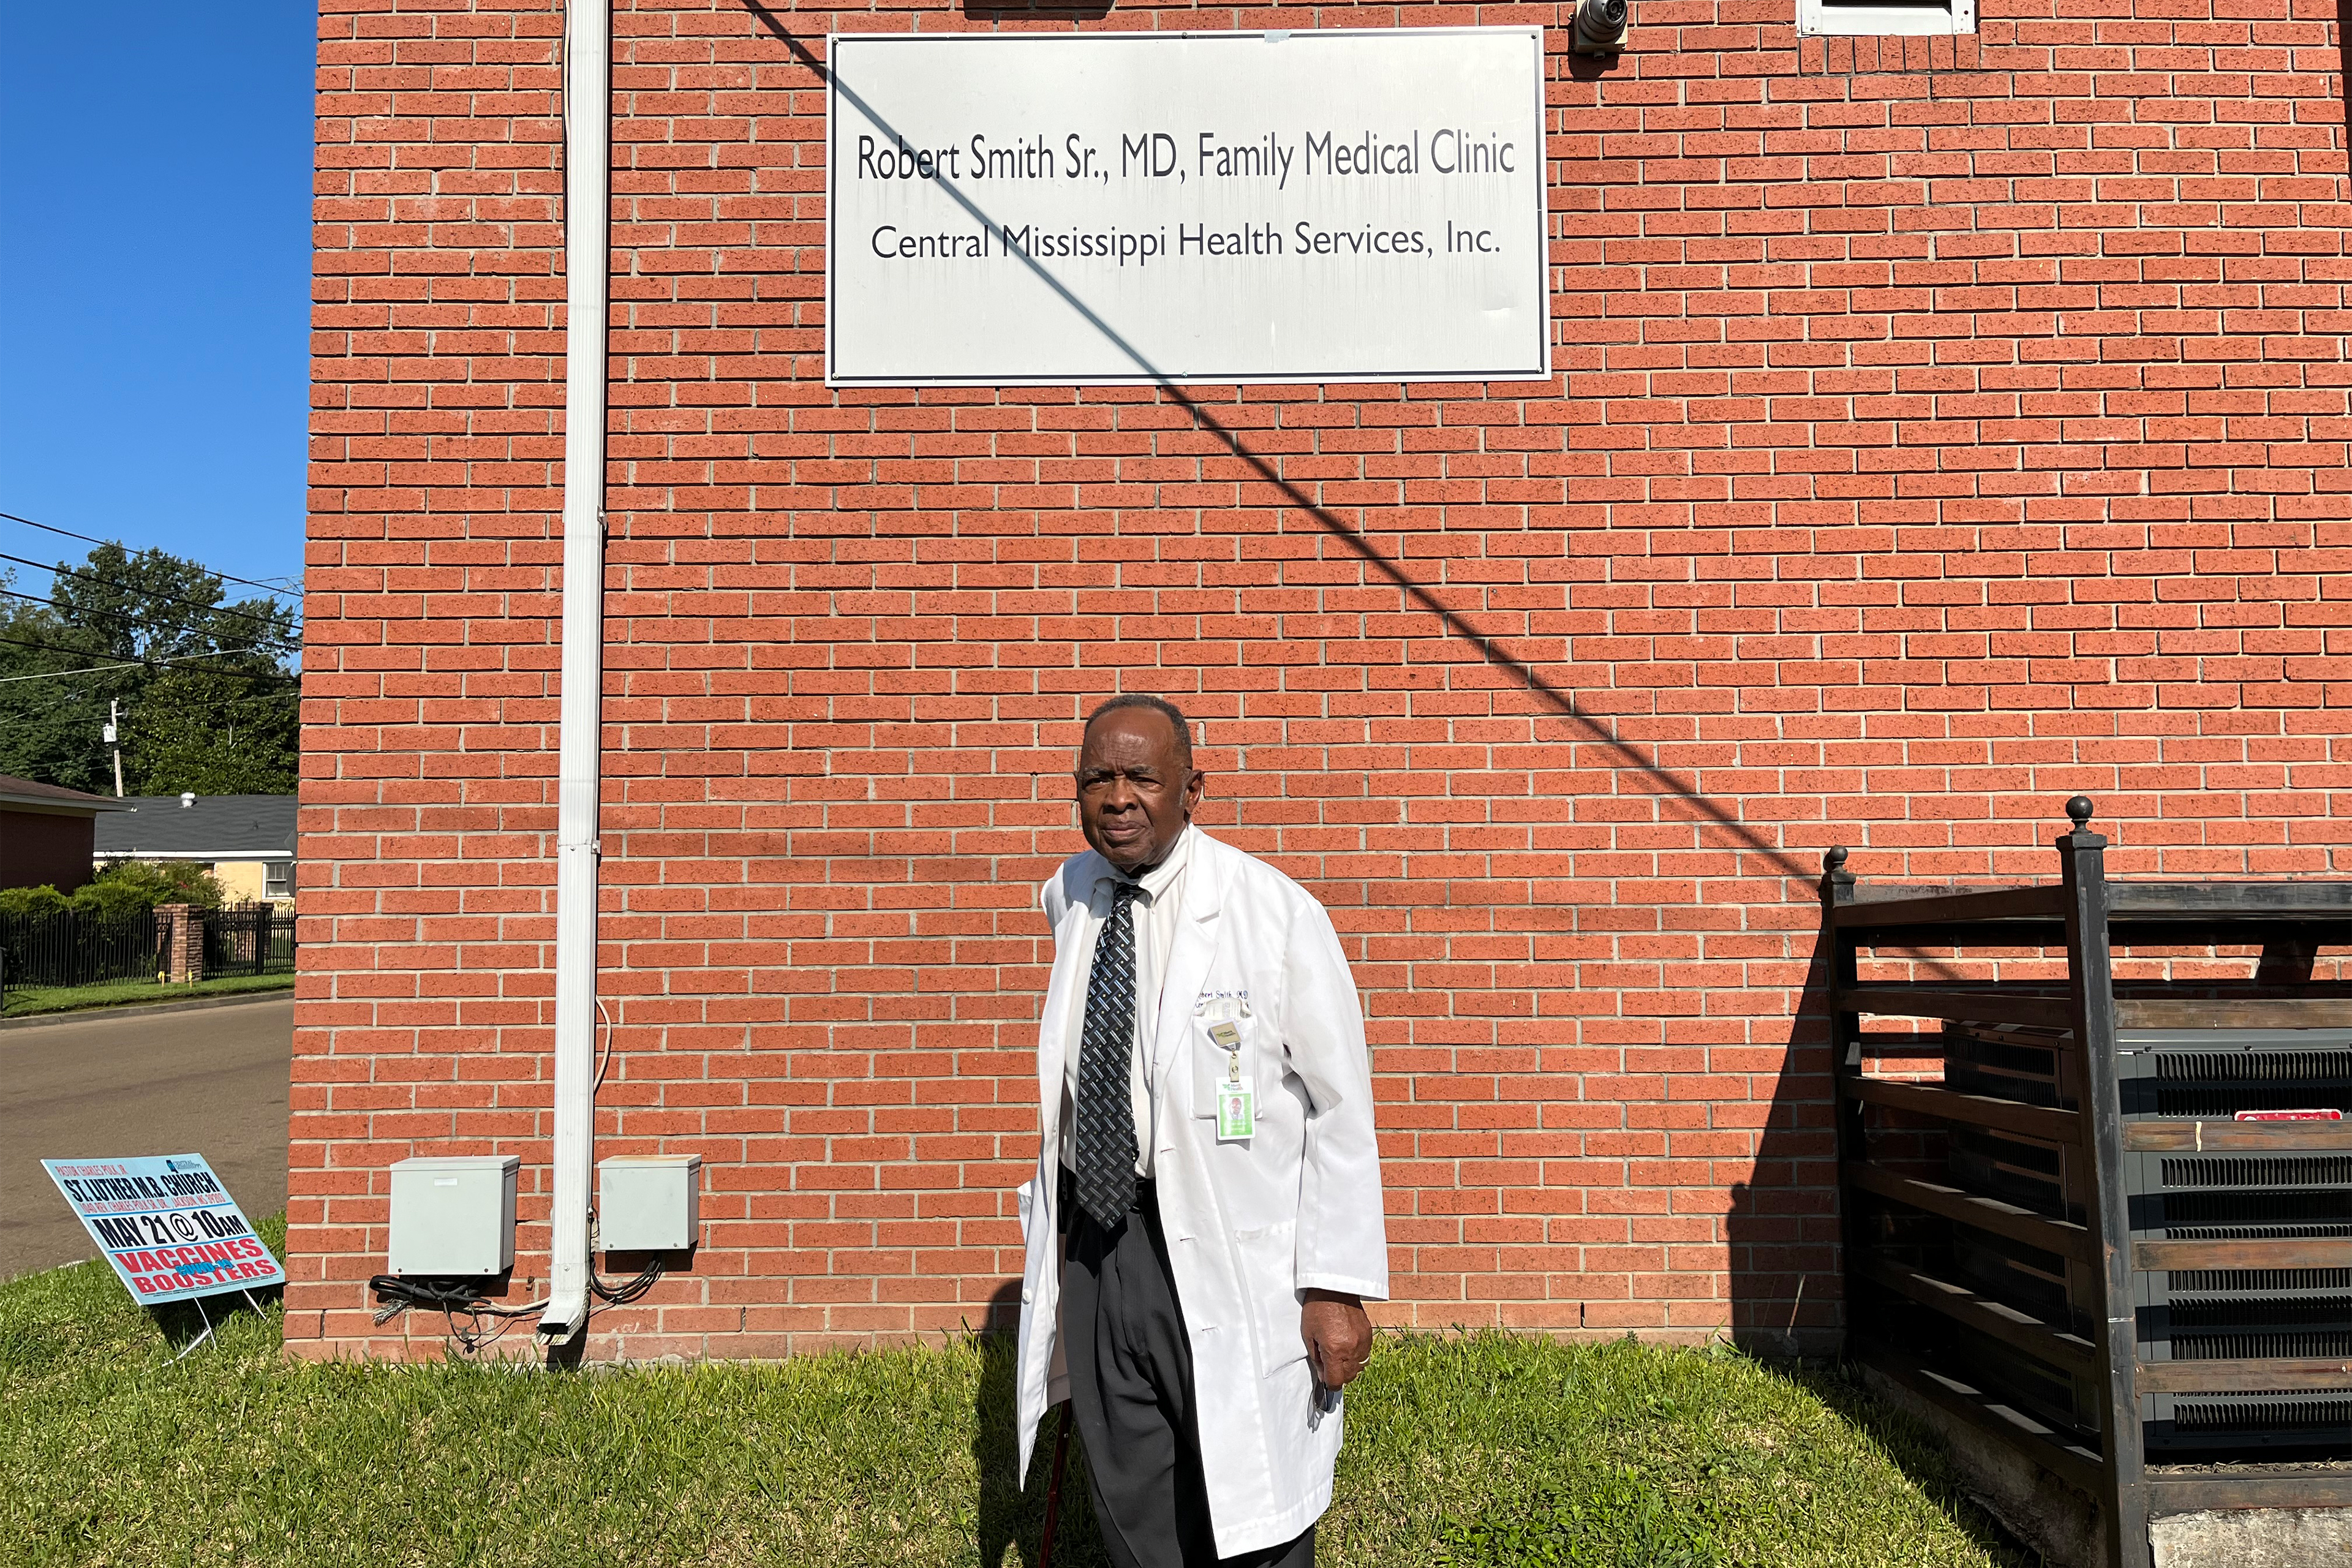 A photo shows Dr. Robert Smith standing outside the Central Mississippi Health Services building.